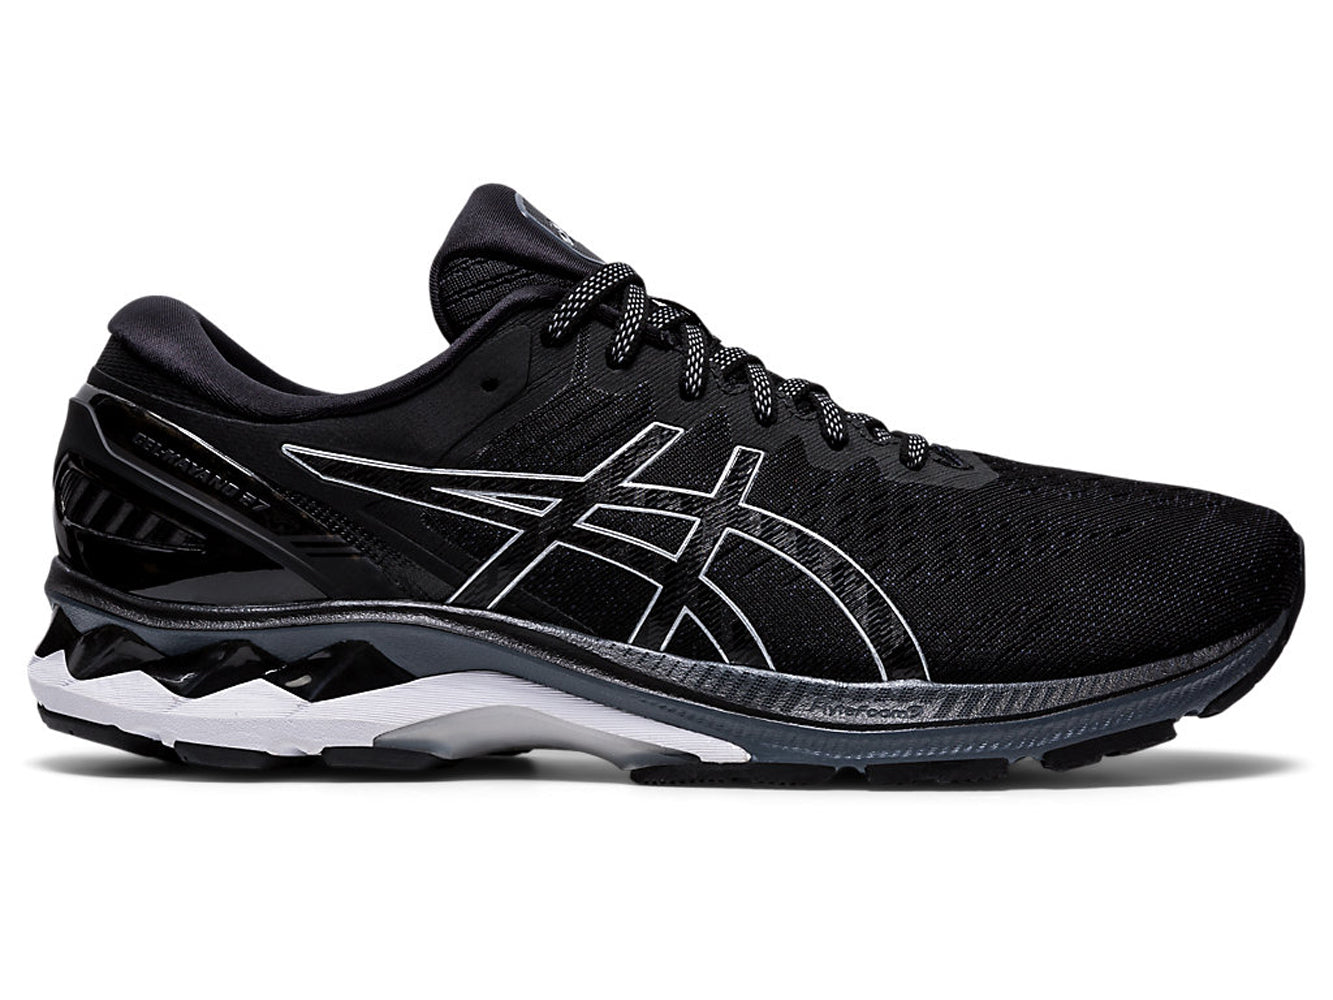 Men's Asics GEL-Kayano 27 Running Shoe in Black/Pure Silver from the side